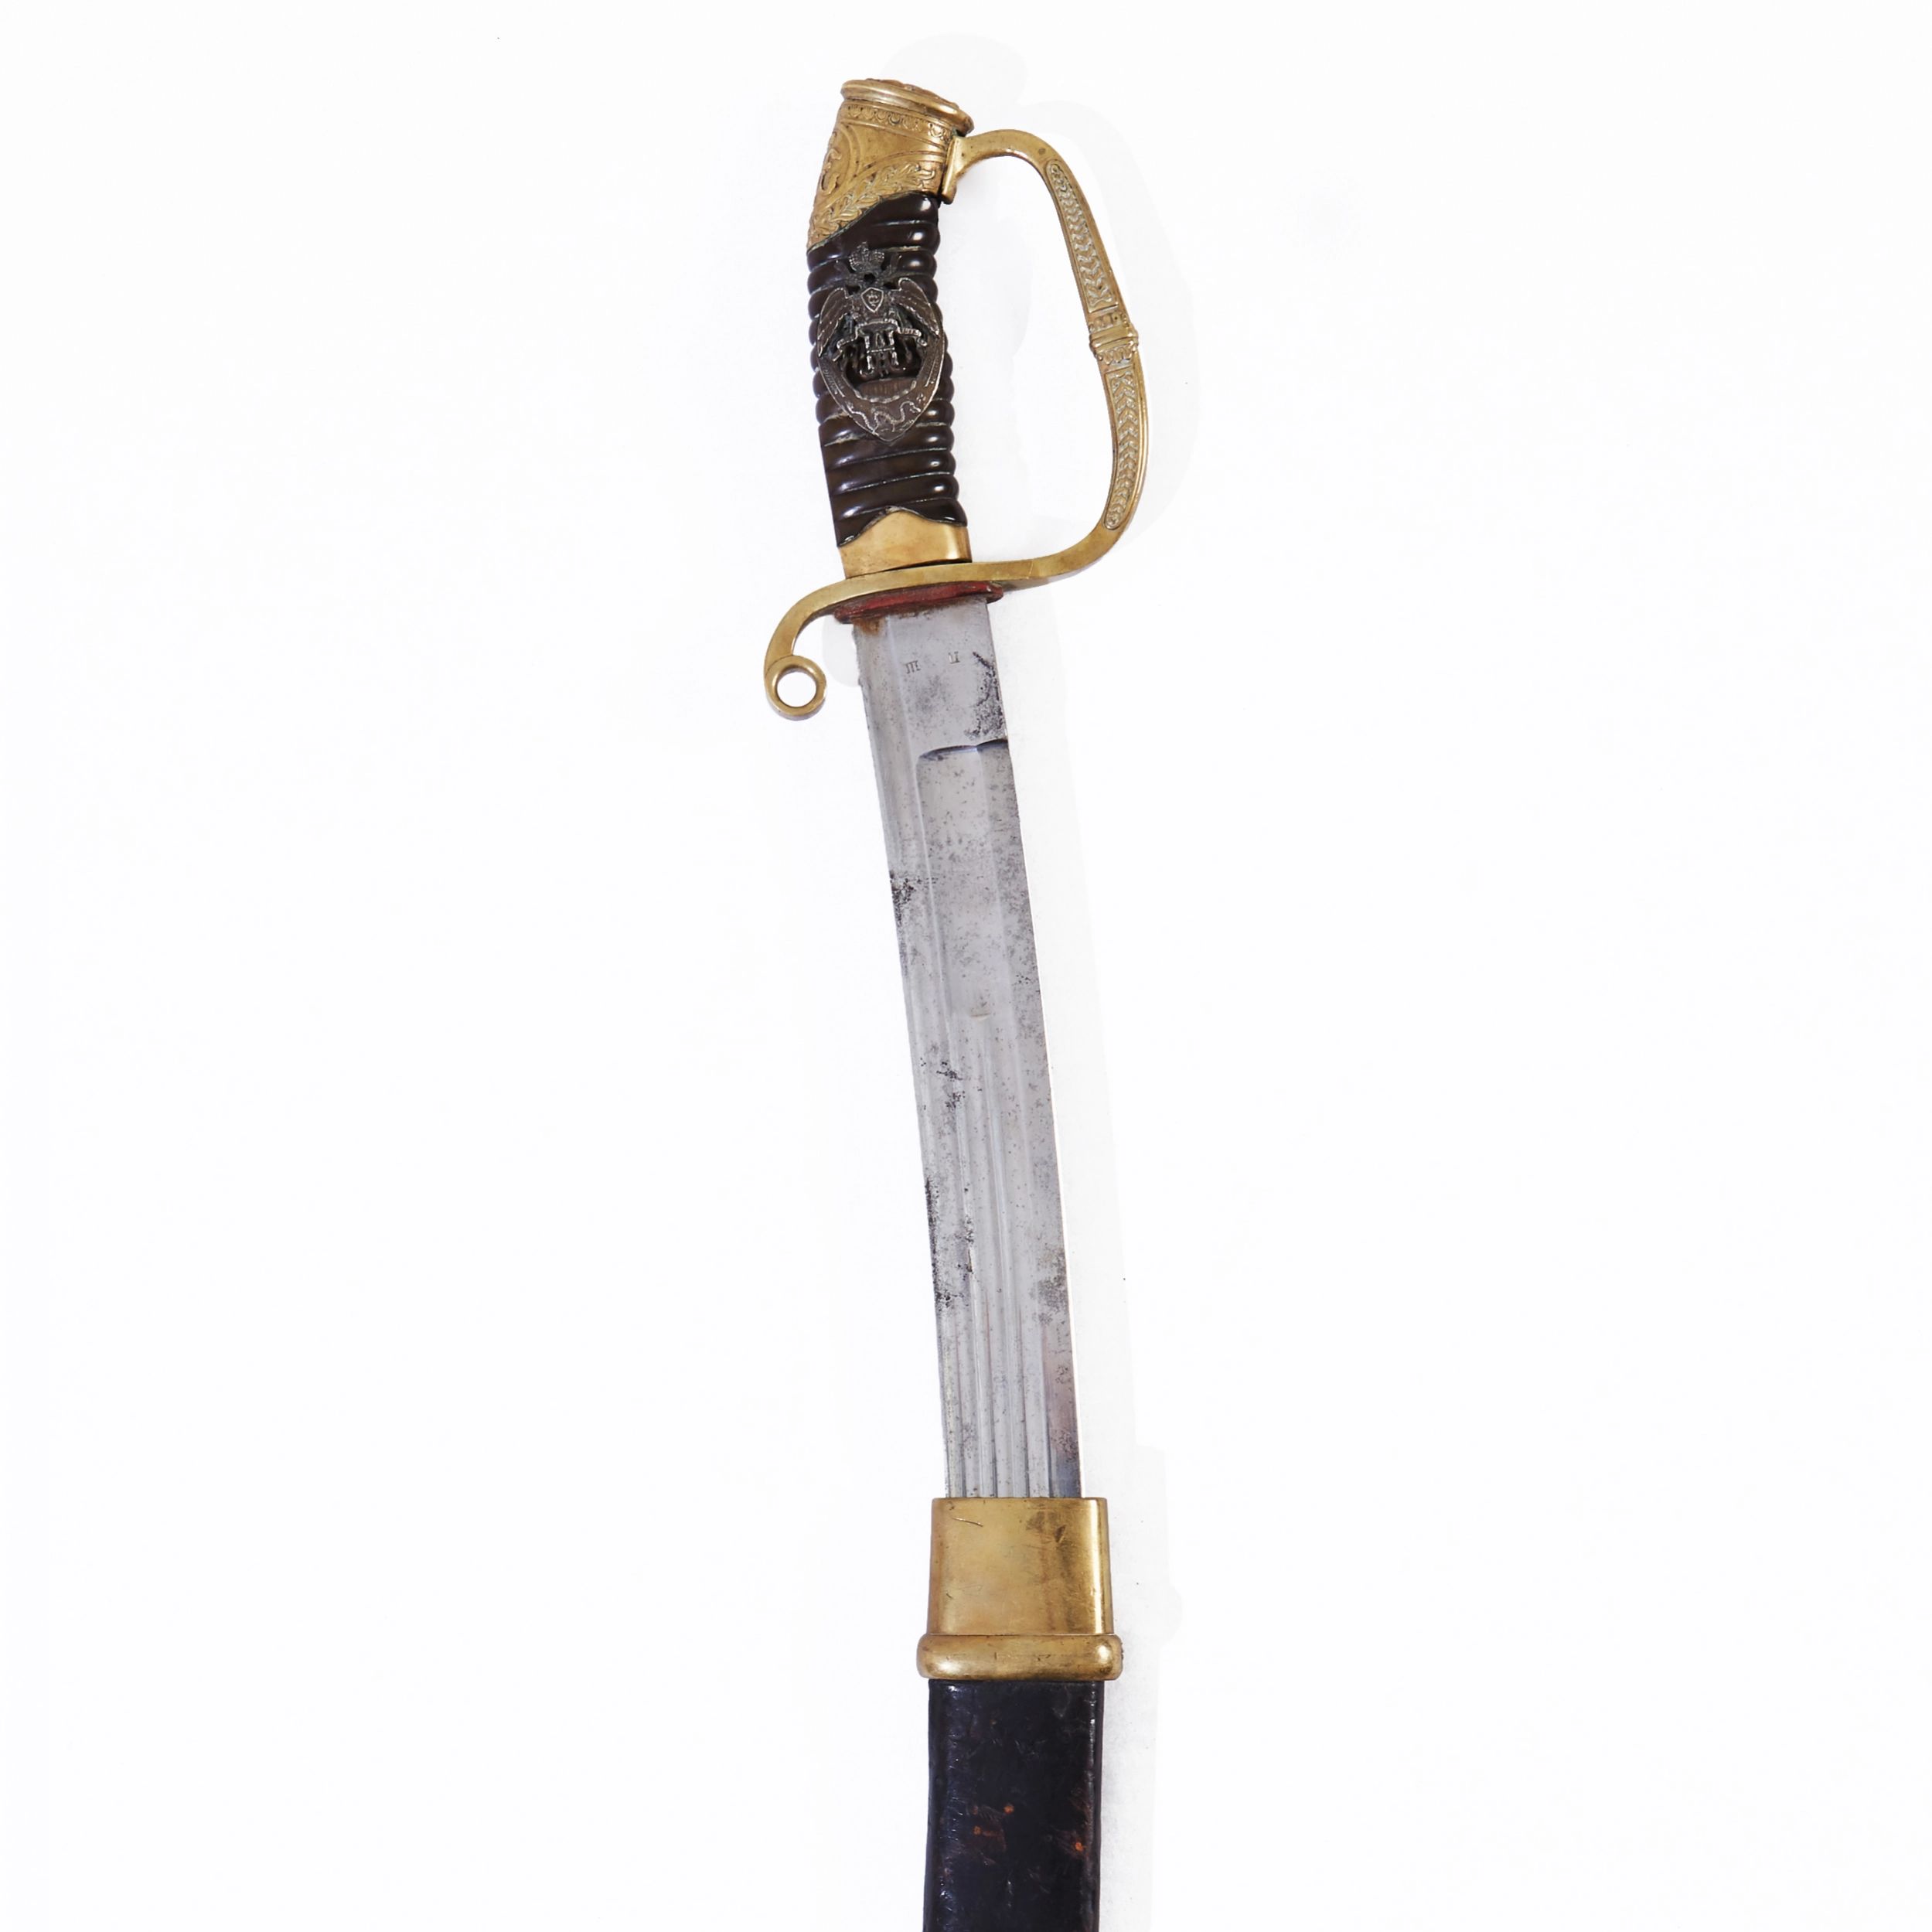 Russian-saber-of-dragoon-officers